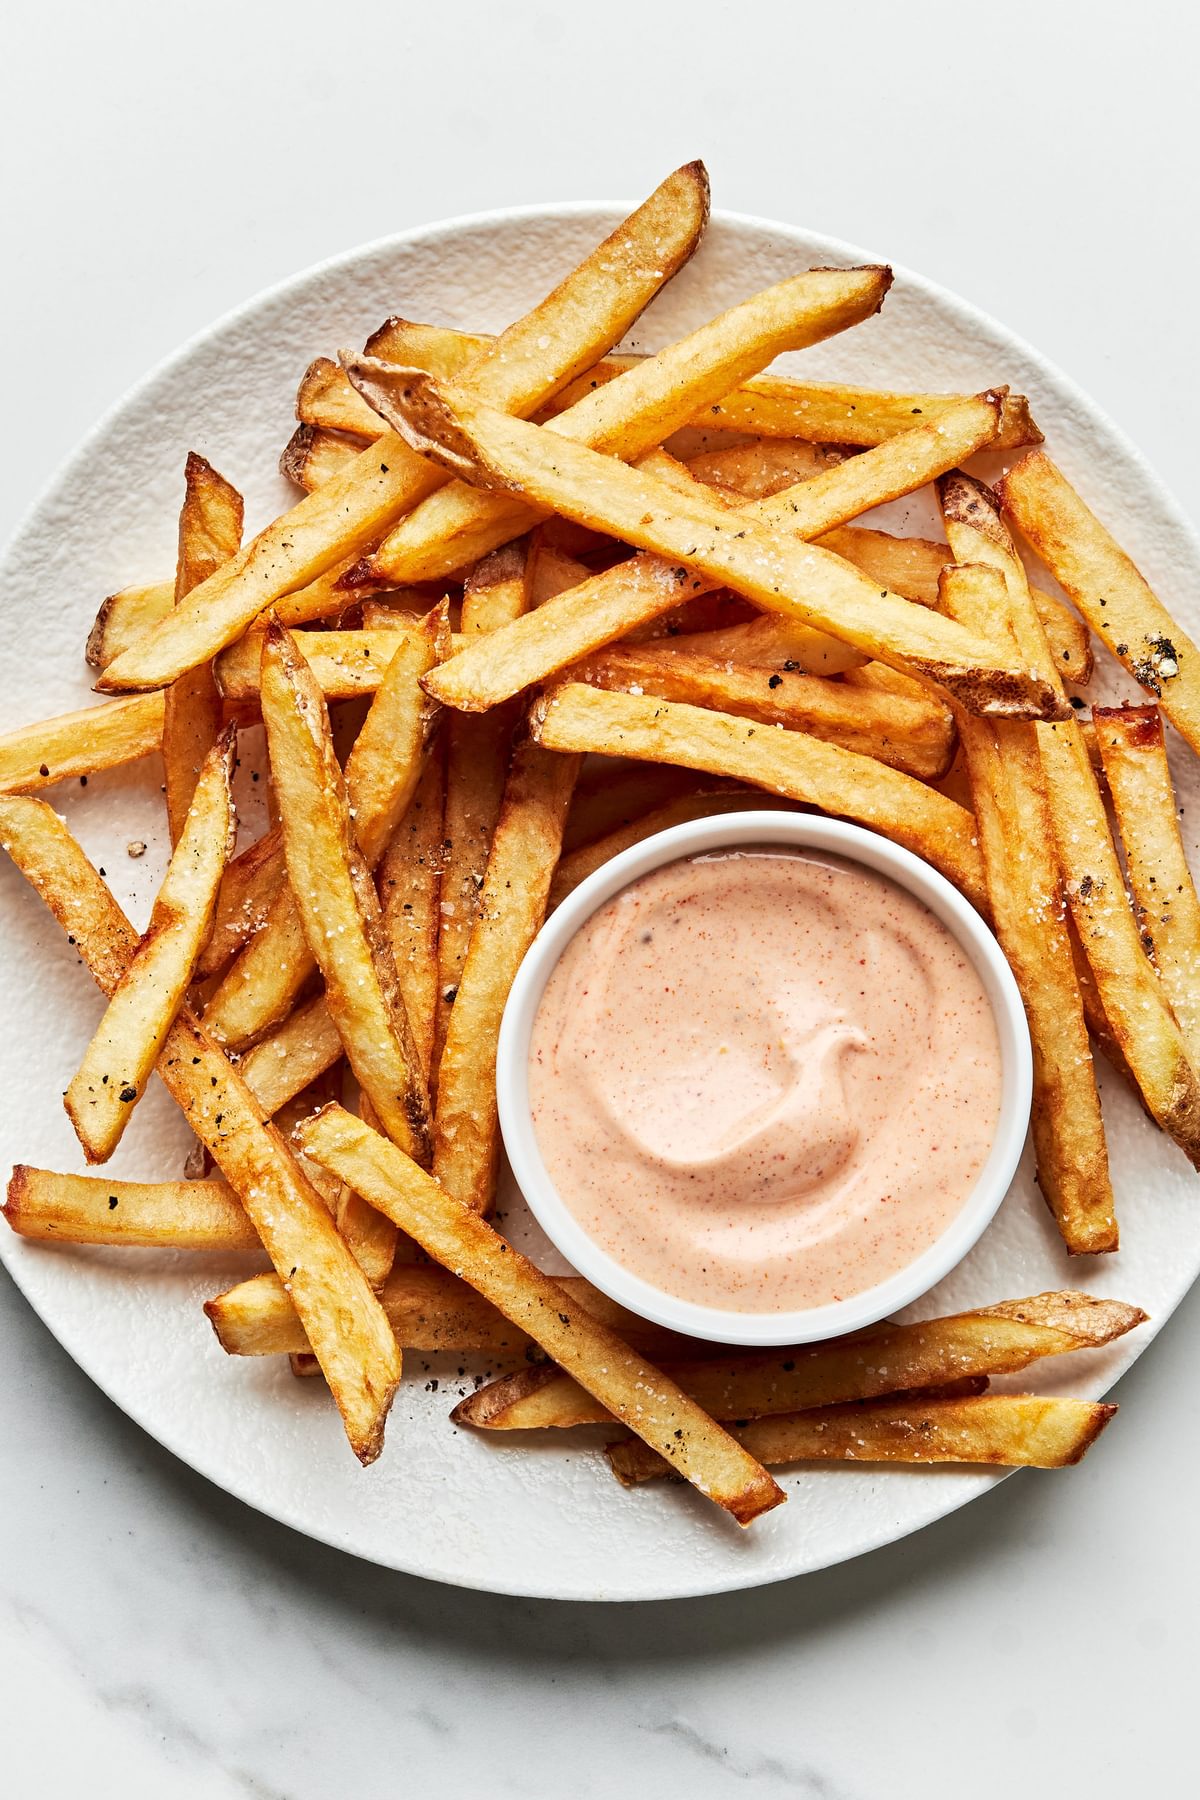 homemade french fries on a plate with a bowl of homemade fry sauce for dipping